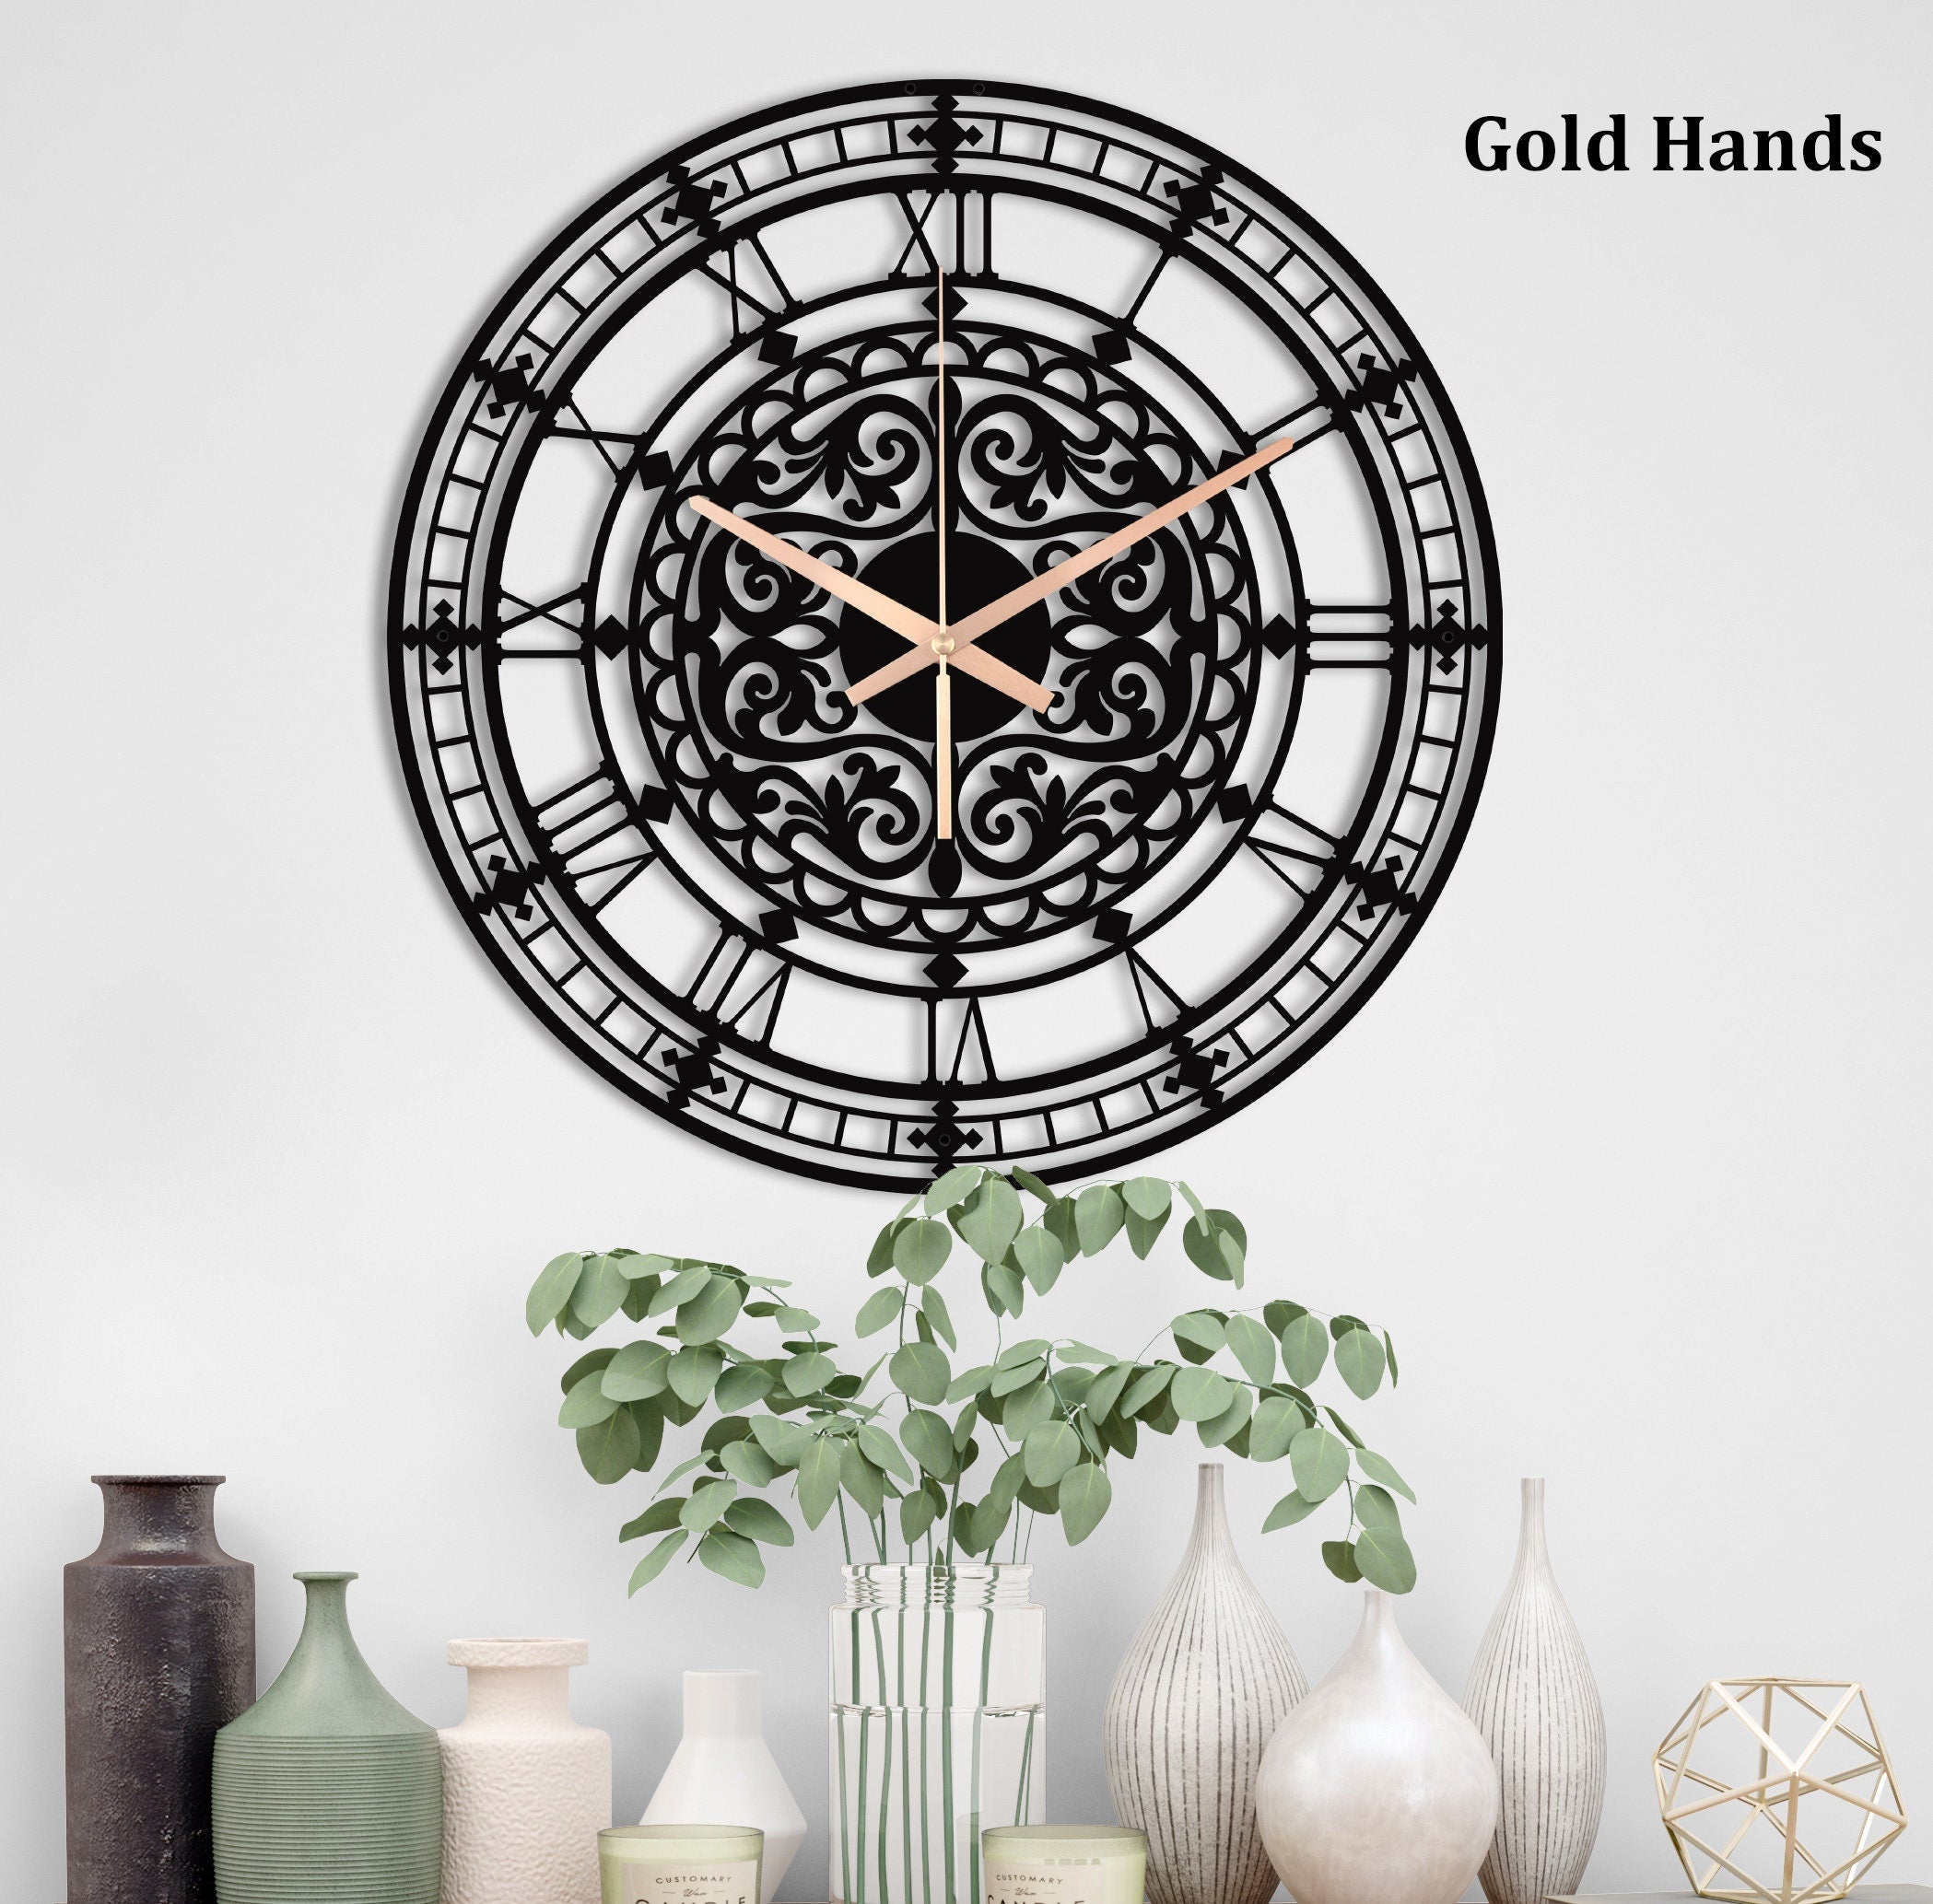 Metal Wall Clock, Mid Century Modern Wall Clock, Large Wall Clock, Home Decor Gifts, Unique Wall Clock, Silent Wall Clock, Clocks For Wall